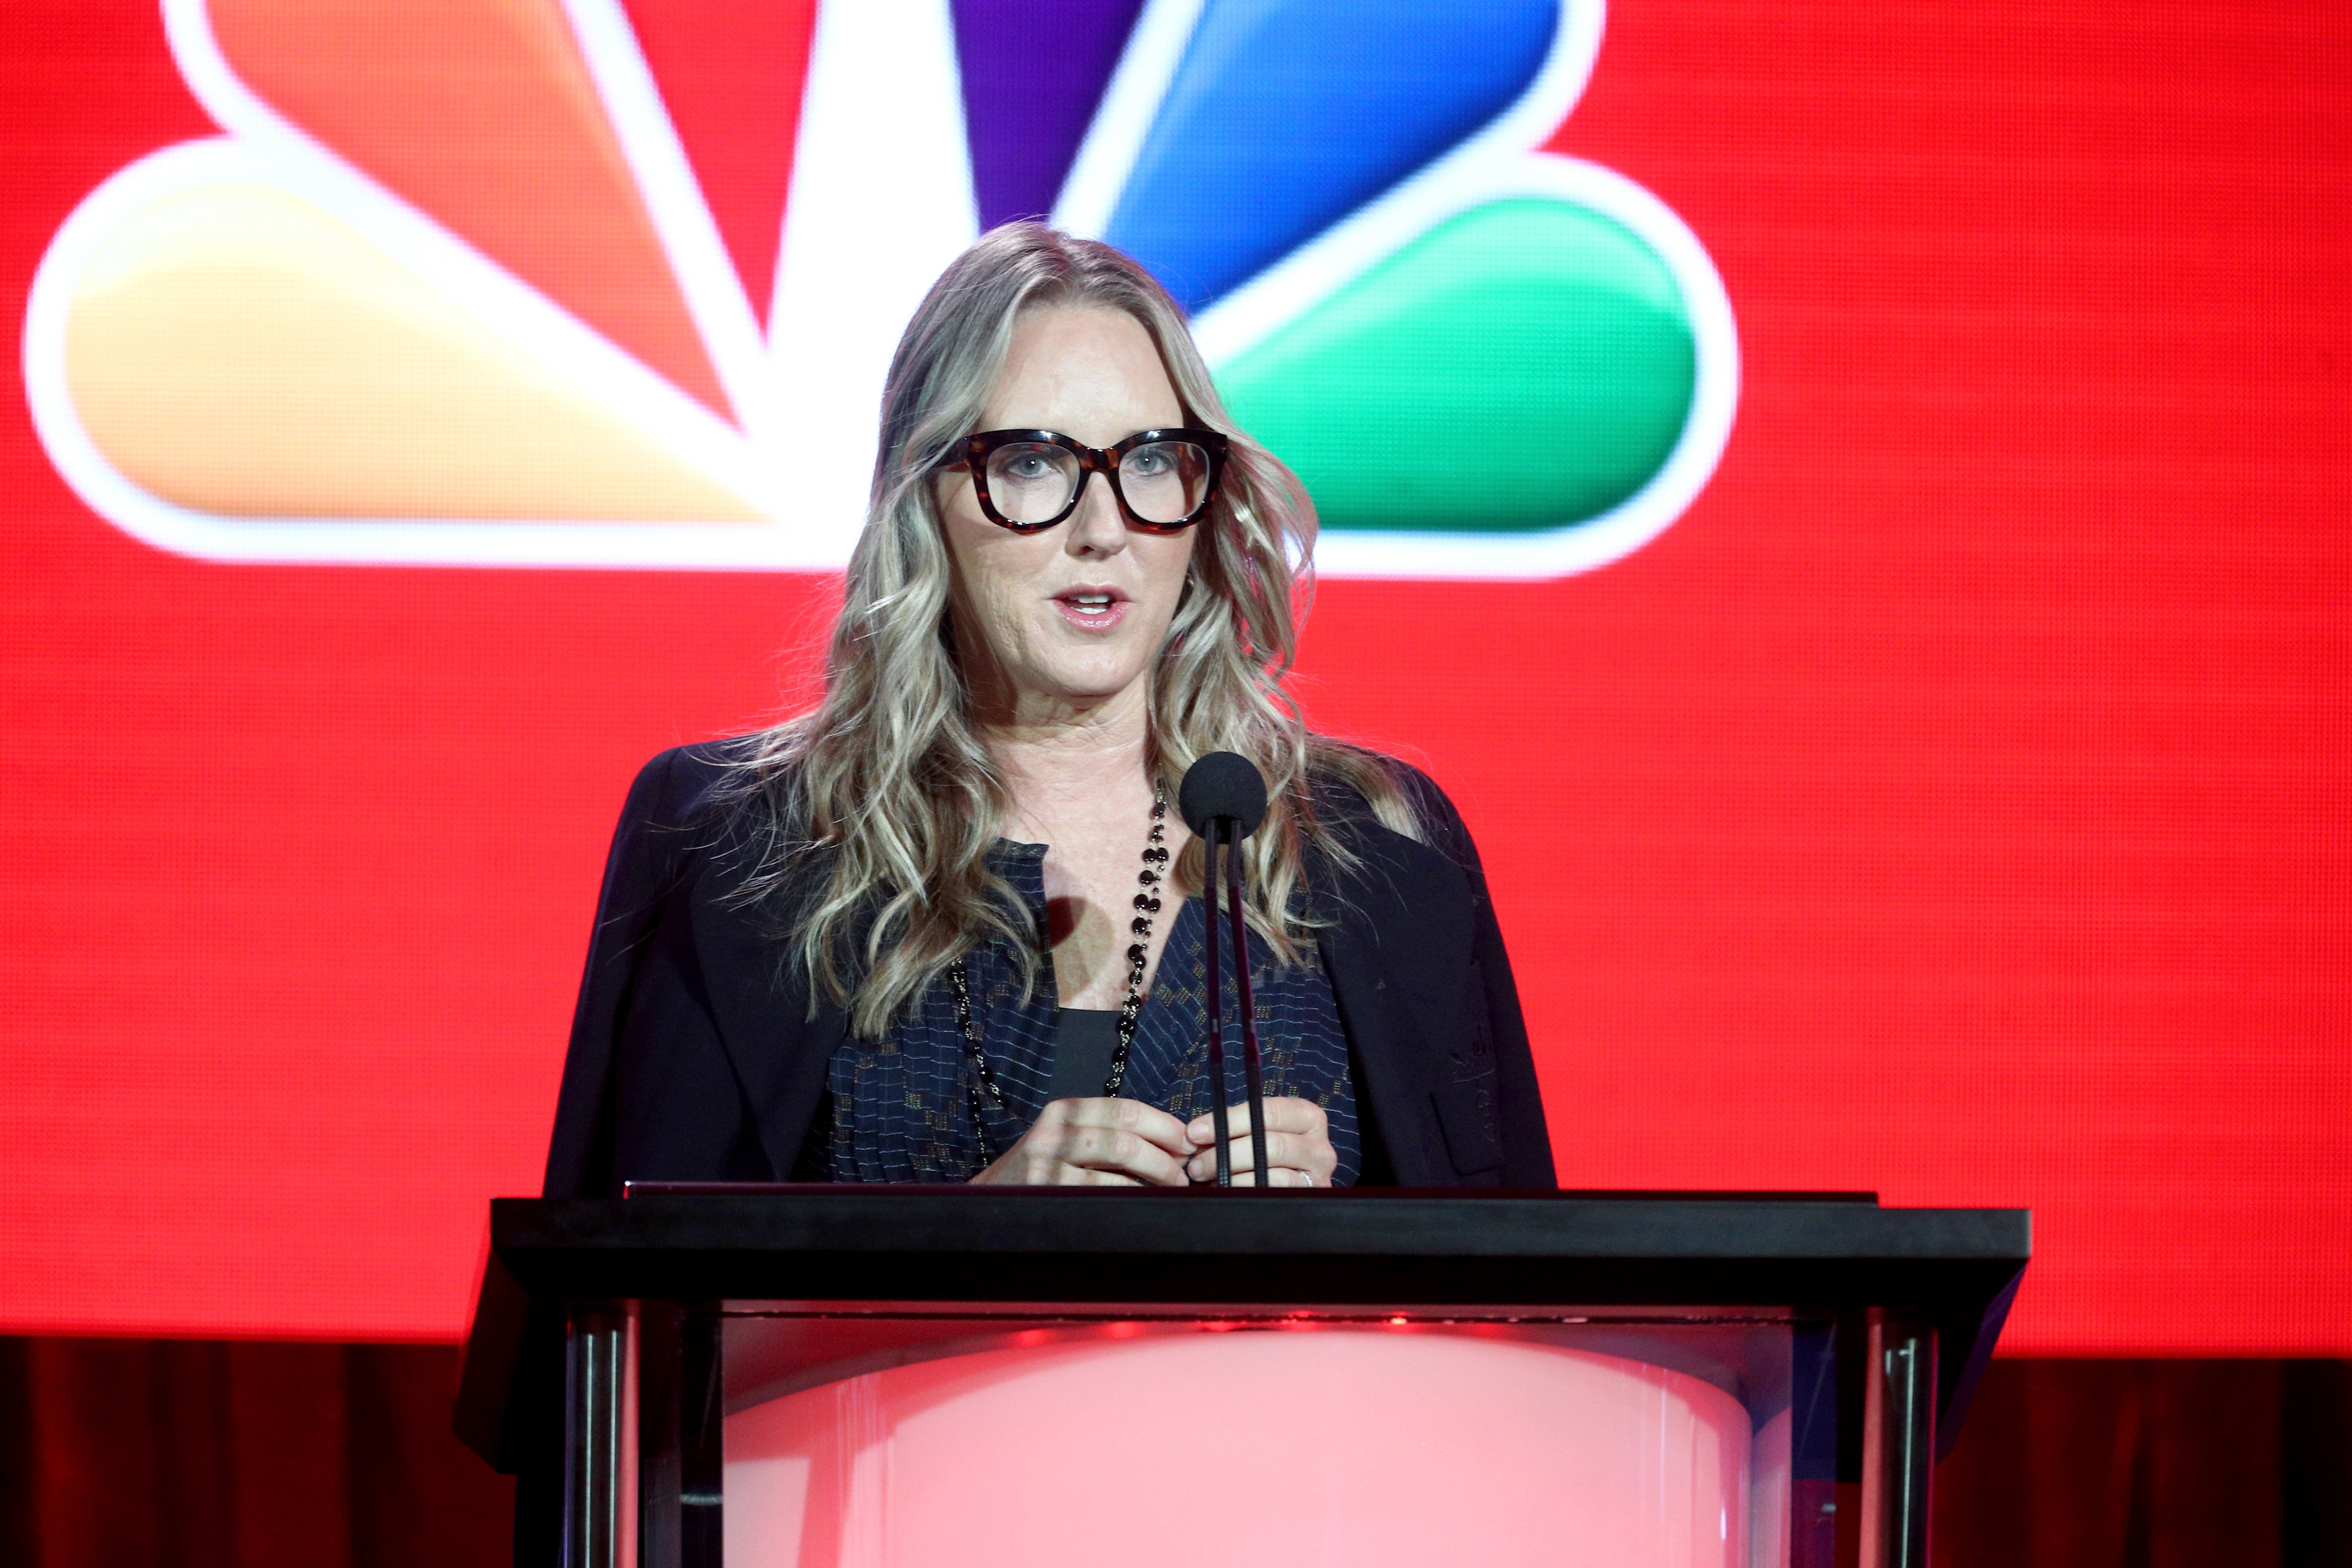 President of NBC Entertainment Jennifer Salke speaks onstage during the NBCUniversal portion of the 2018 Winter Television Critics Association Press Tour at The Langham Huntington, Pasadena on January 9, 2018 in Pasadena, California. (Frederick M. Brown—Getty Images)